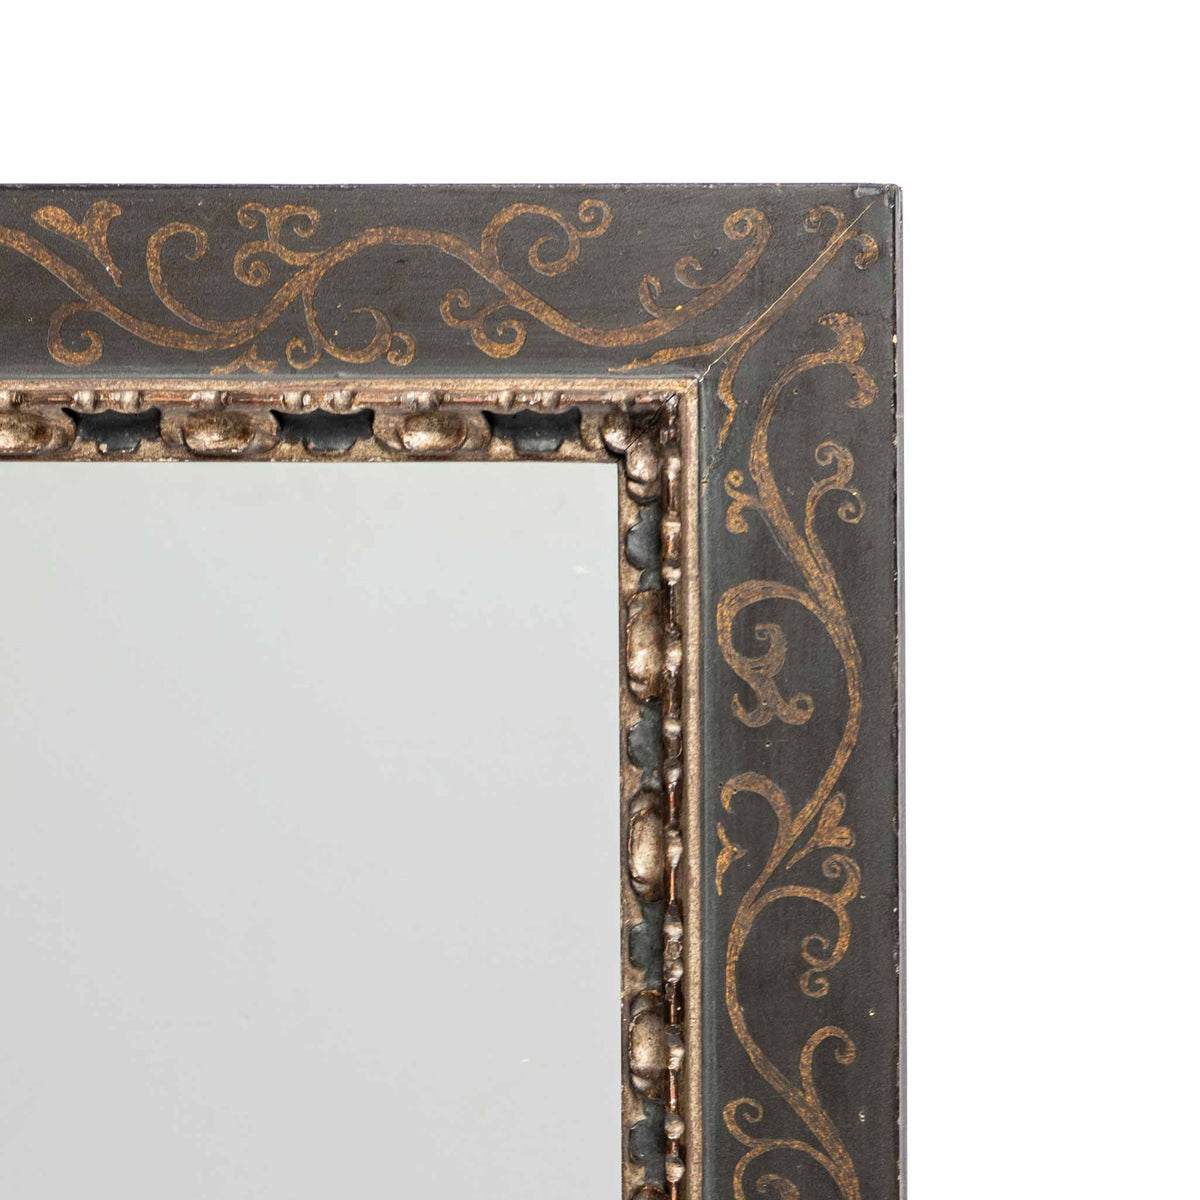 Painted frame mirror S1 F33